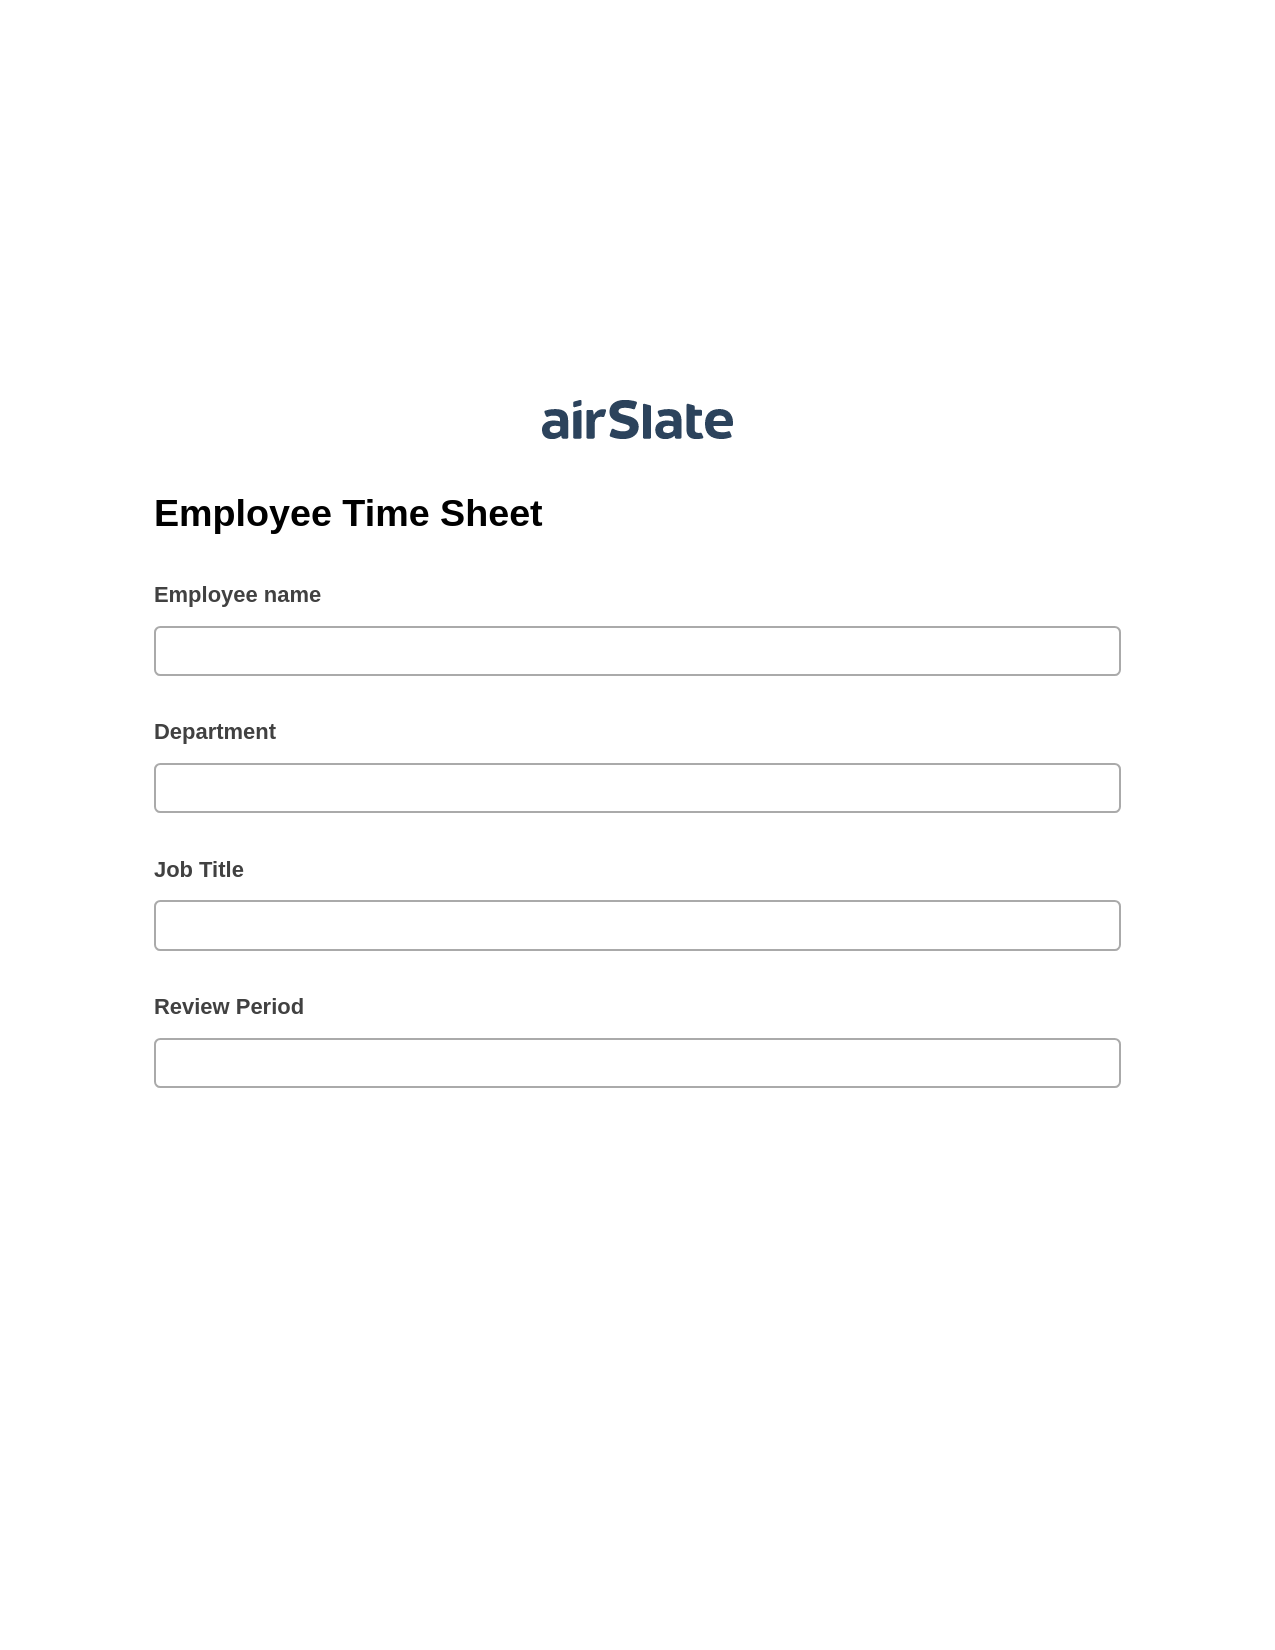 Employee Time Sheet Pre-fill from Salesforce Records Bot, Custom Field's Value Bot, Export to Salesforce Record Bot